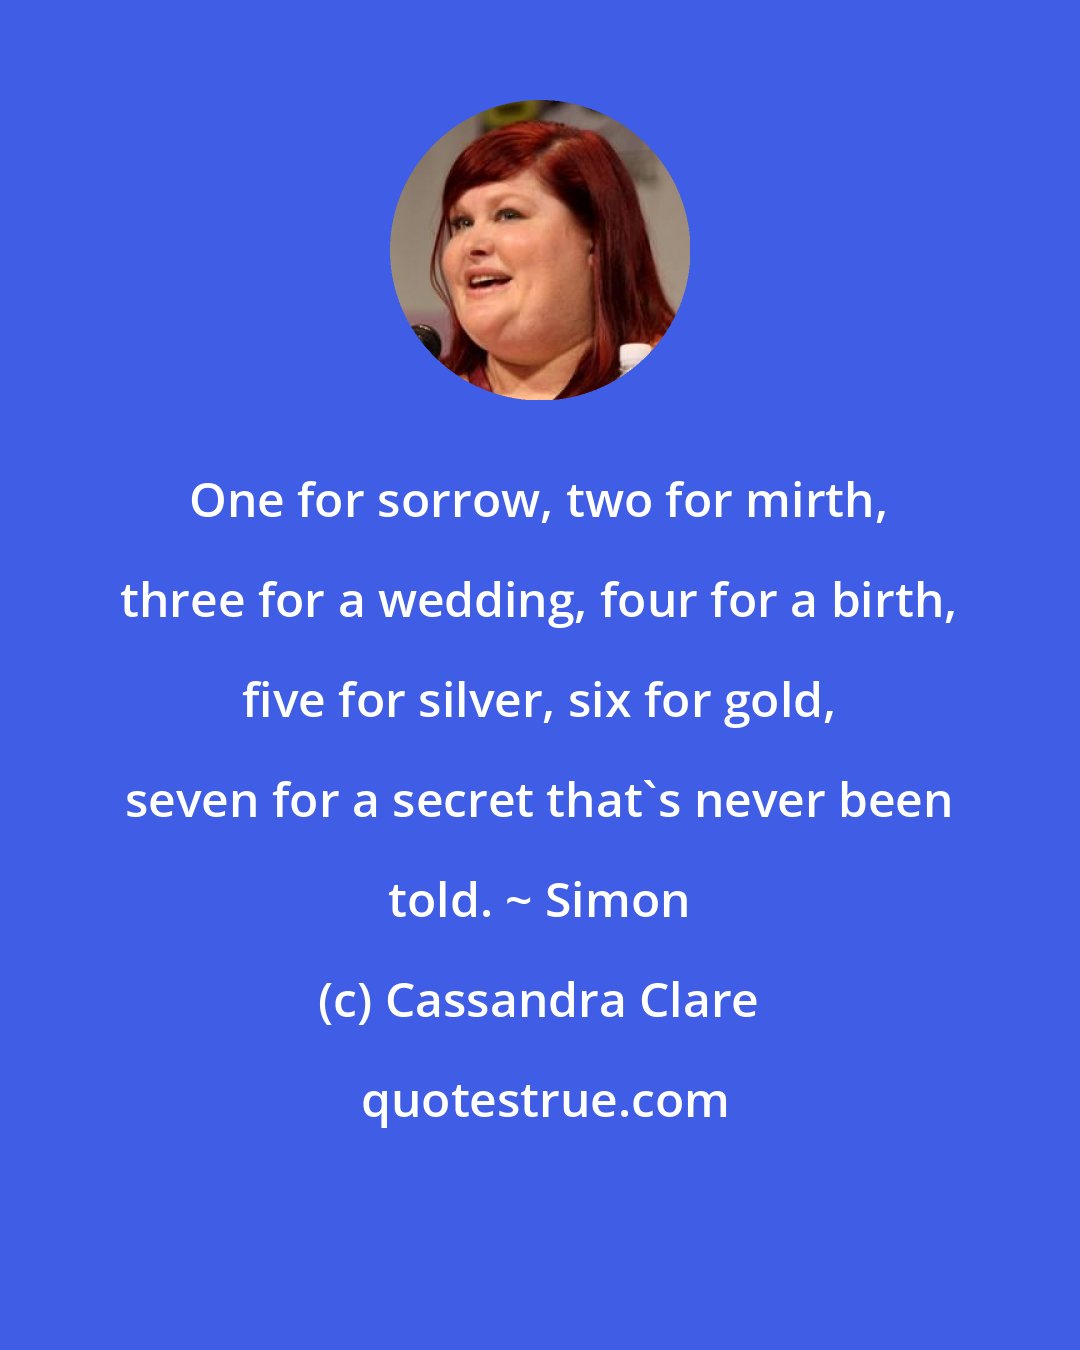 Cassandra Clare: One for sorrow, two for mirth, three for a wedding, four for a birth, five for silver, six for gold, seven for a secret that's never been told. ~ Simon